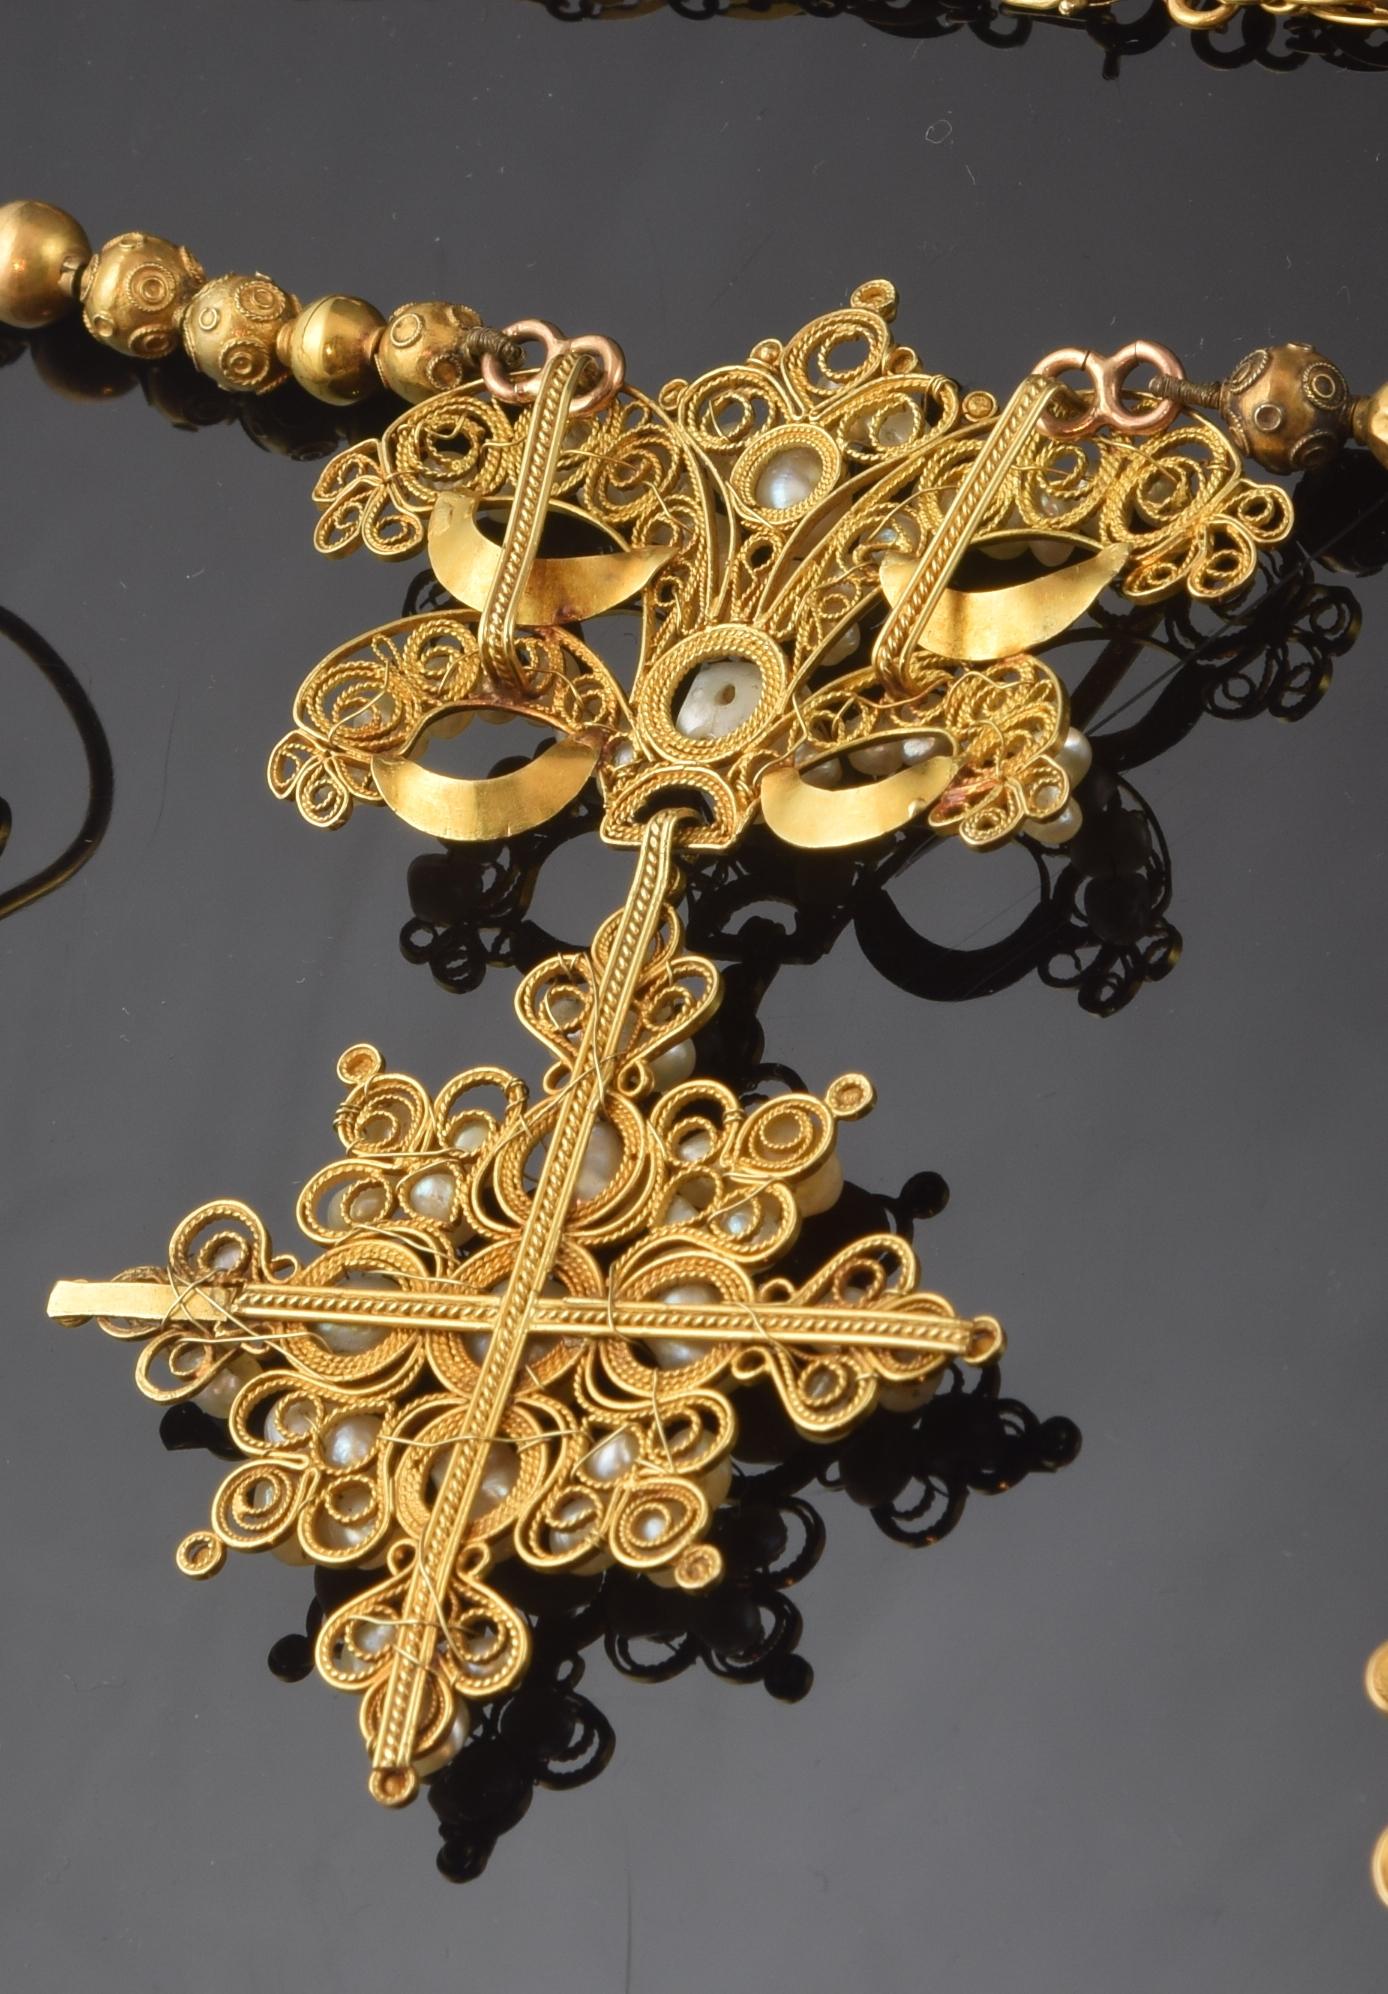 Other Short Necklace 'choker', Gold, Pearls, circa Late 19th Century